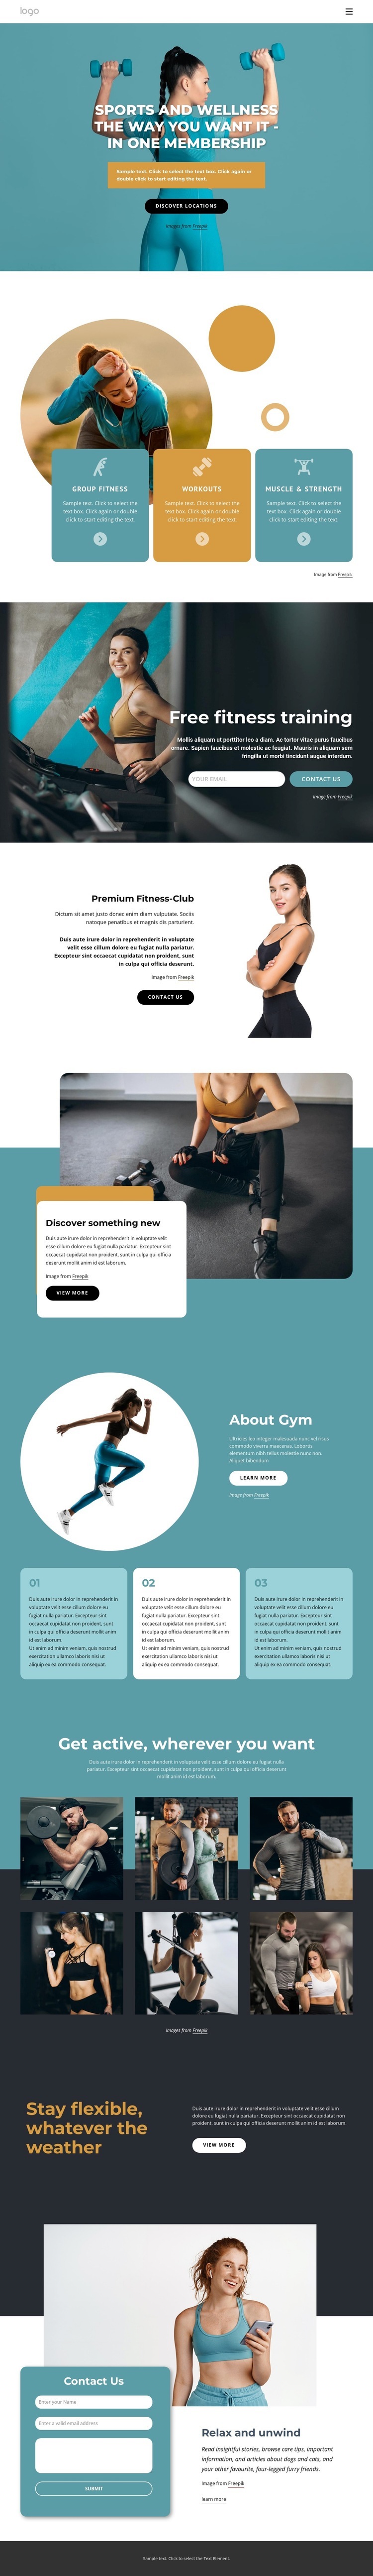 Workout anywhere with one membership Wix Template Alternative